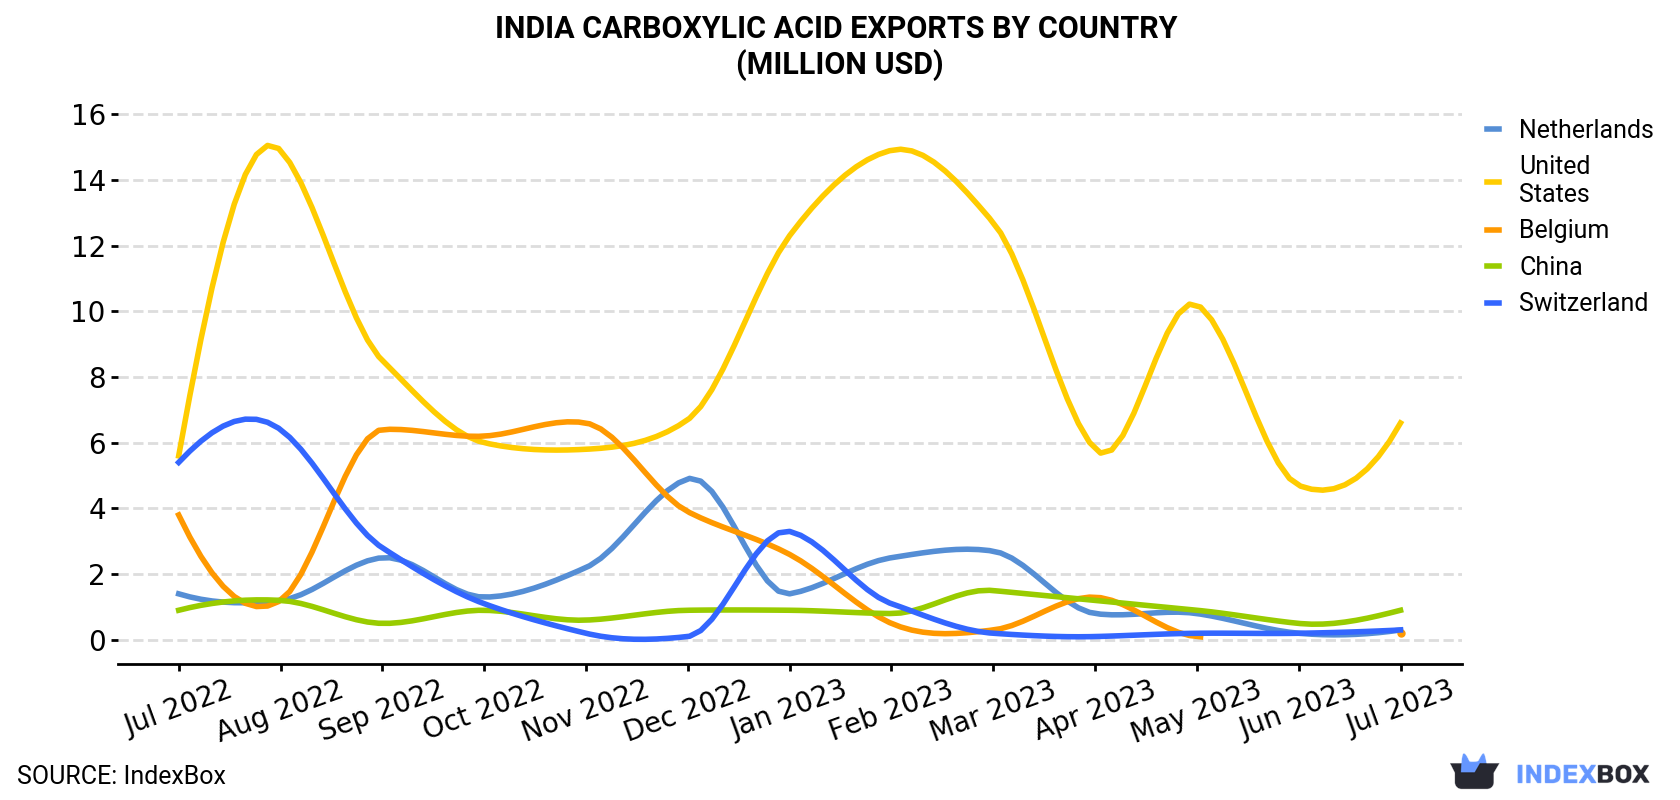 India Carboxylic Acid Exports By Country (Million USD)